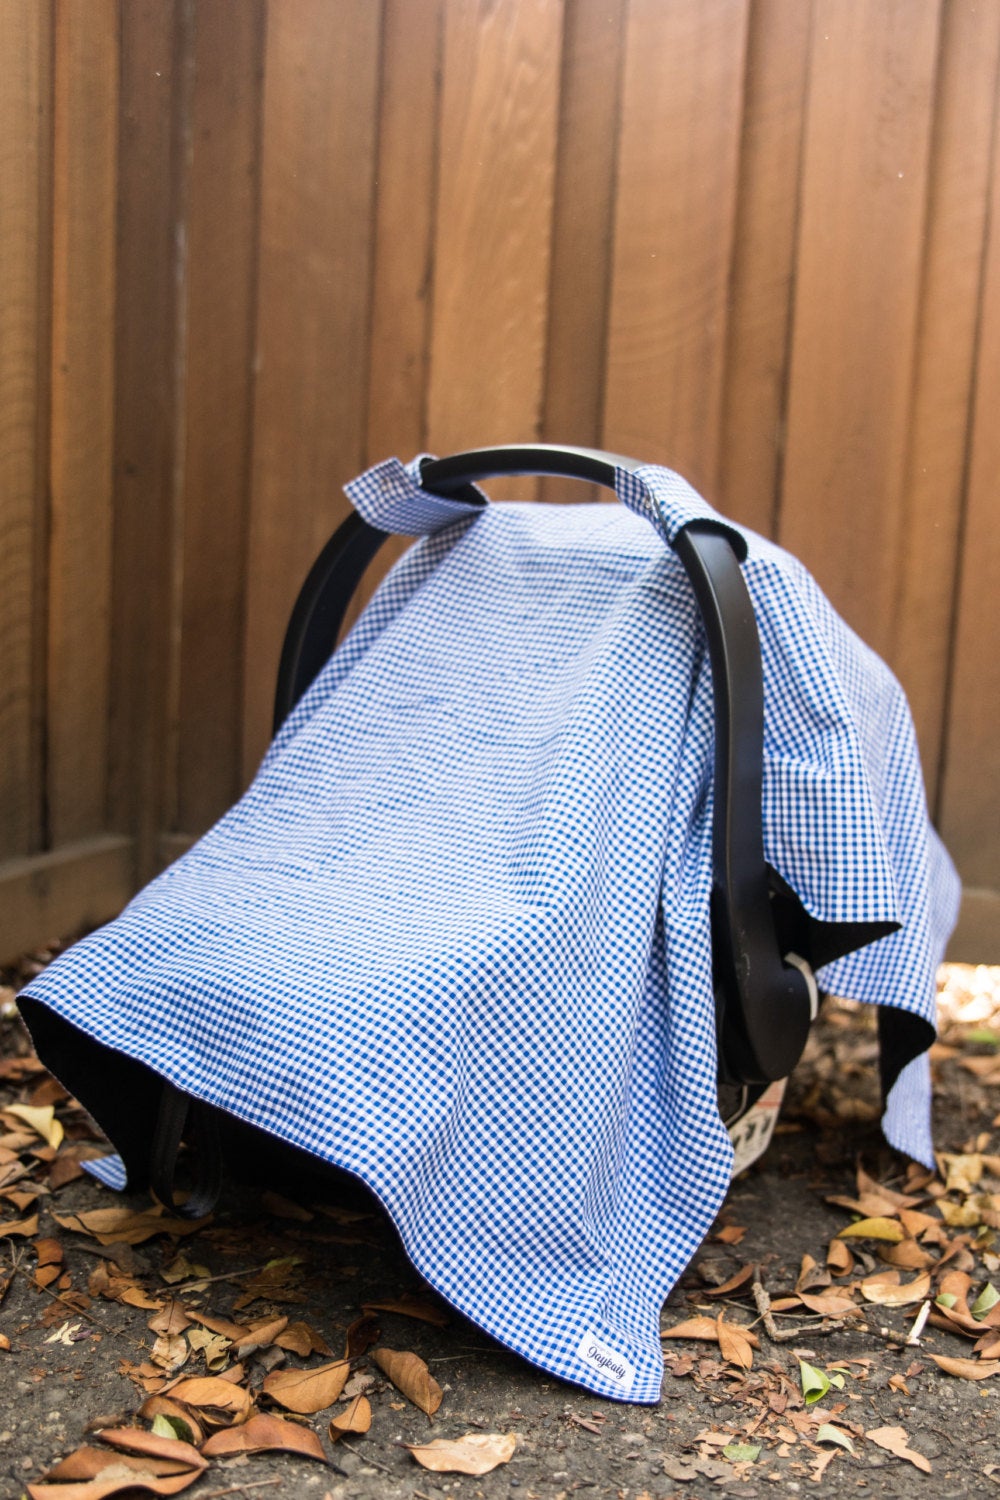 Car Seat Canopy/Cover Pattern